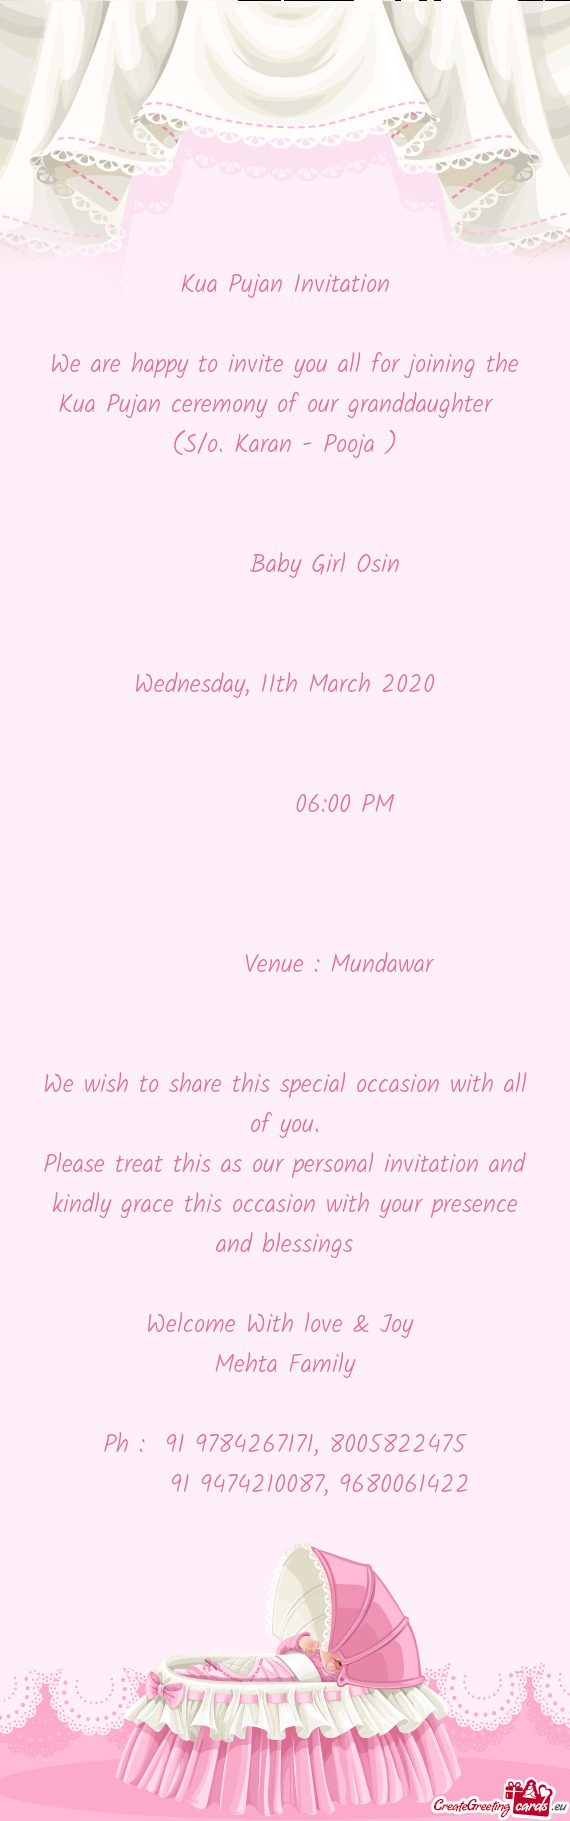 We are happy to invite you all for joining the Kua Pujan ceremony of our granddaughter